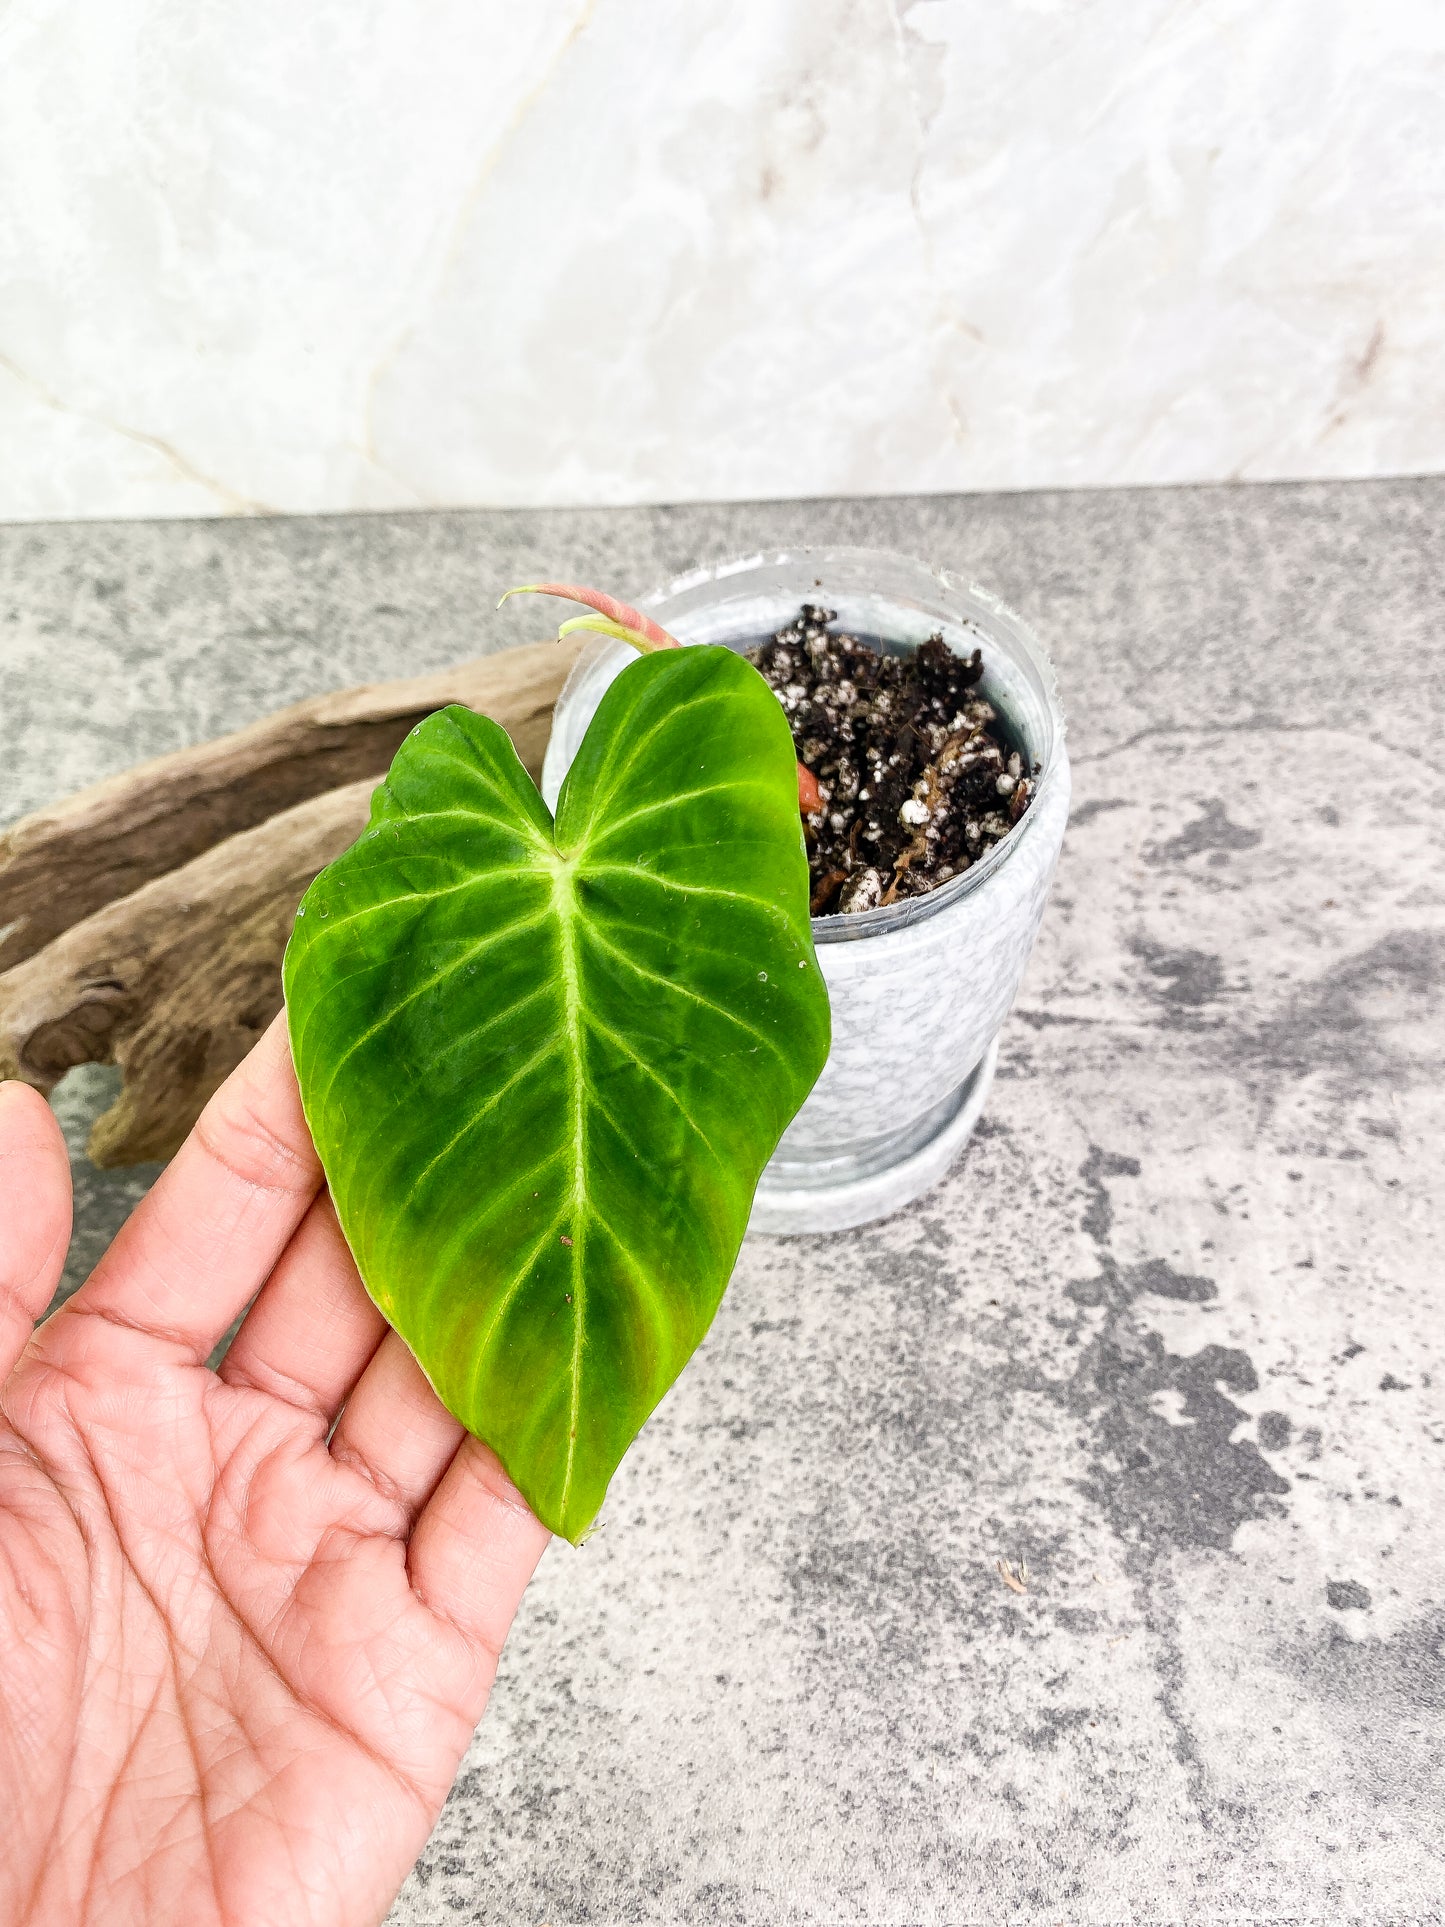 Philodendron verrucosum san miguel Slightly Rooted 2 leaves Top Cutting. This is the verrucosum type with wavy leaves and can size up much faster than any other verrucosum.